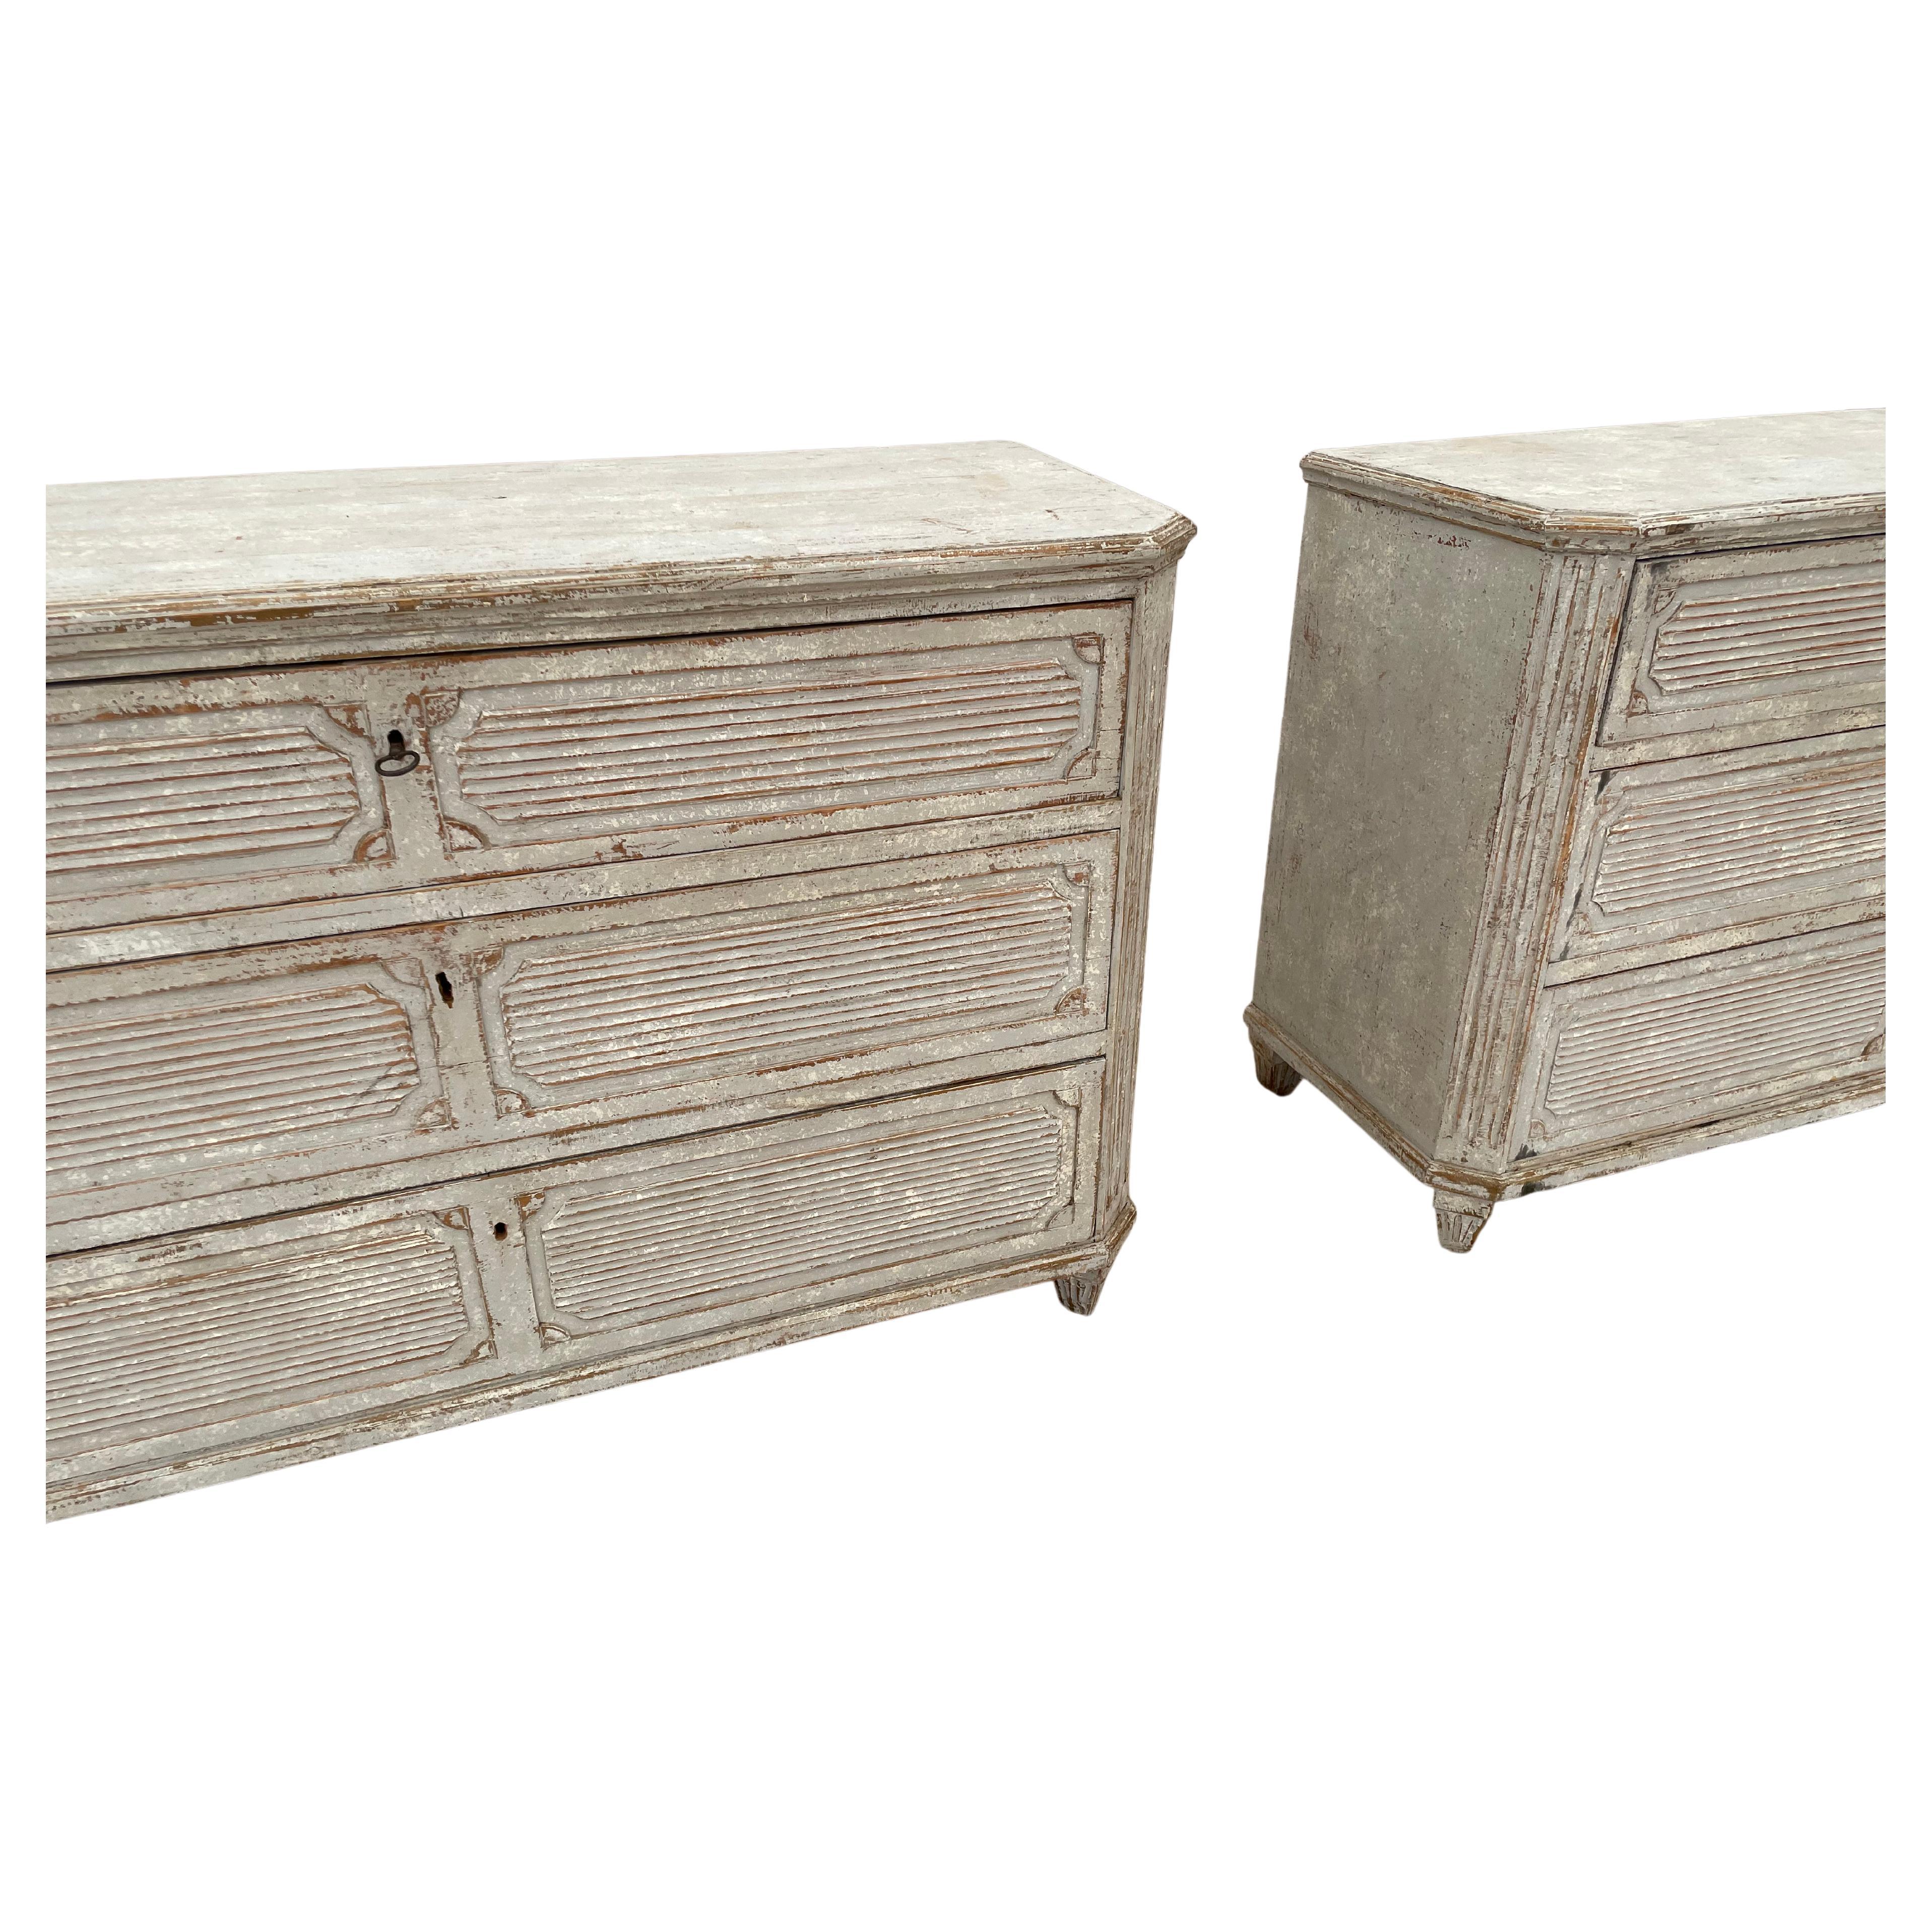 Amazing and rare grande pair of Swedish Gustavian commodes in a white and gray color palette. These are stunning and are a complete showstopper. Pair these in any design space and they will stand out as a statement piece. Imported from Europe and